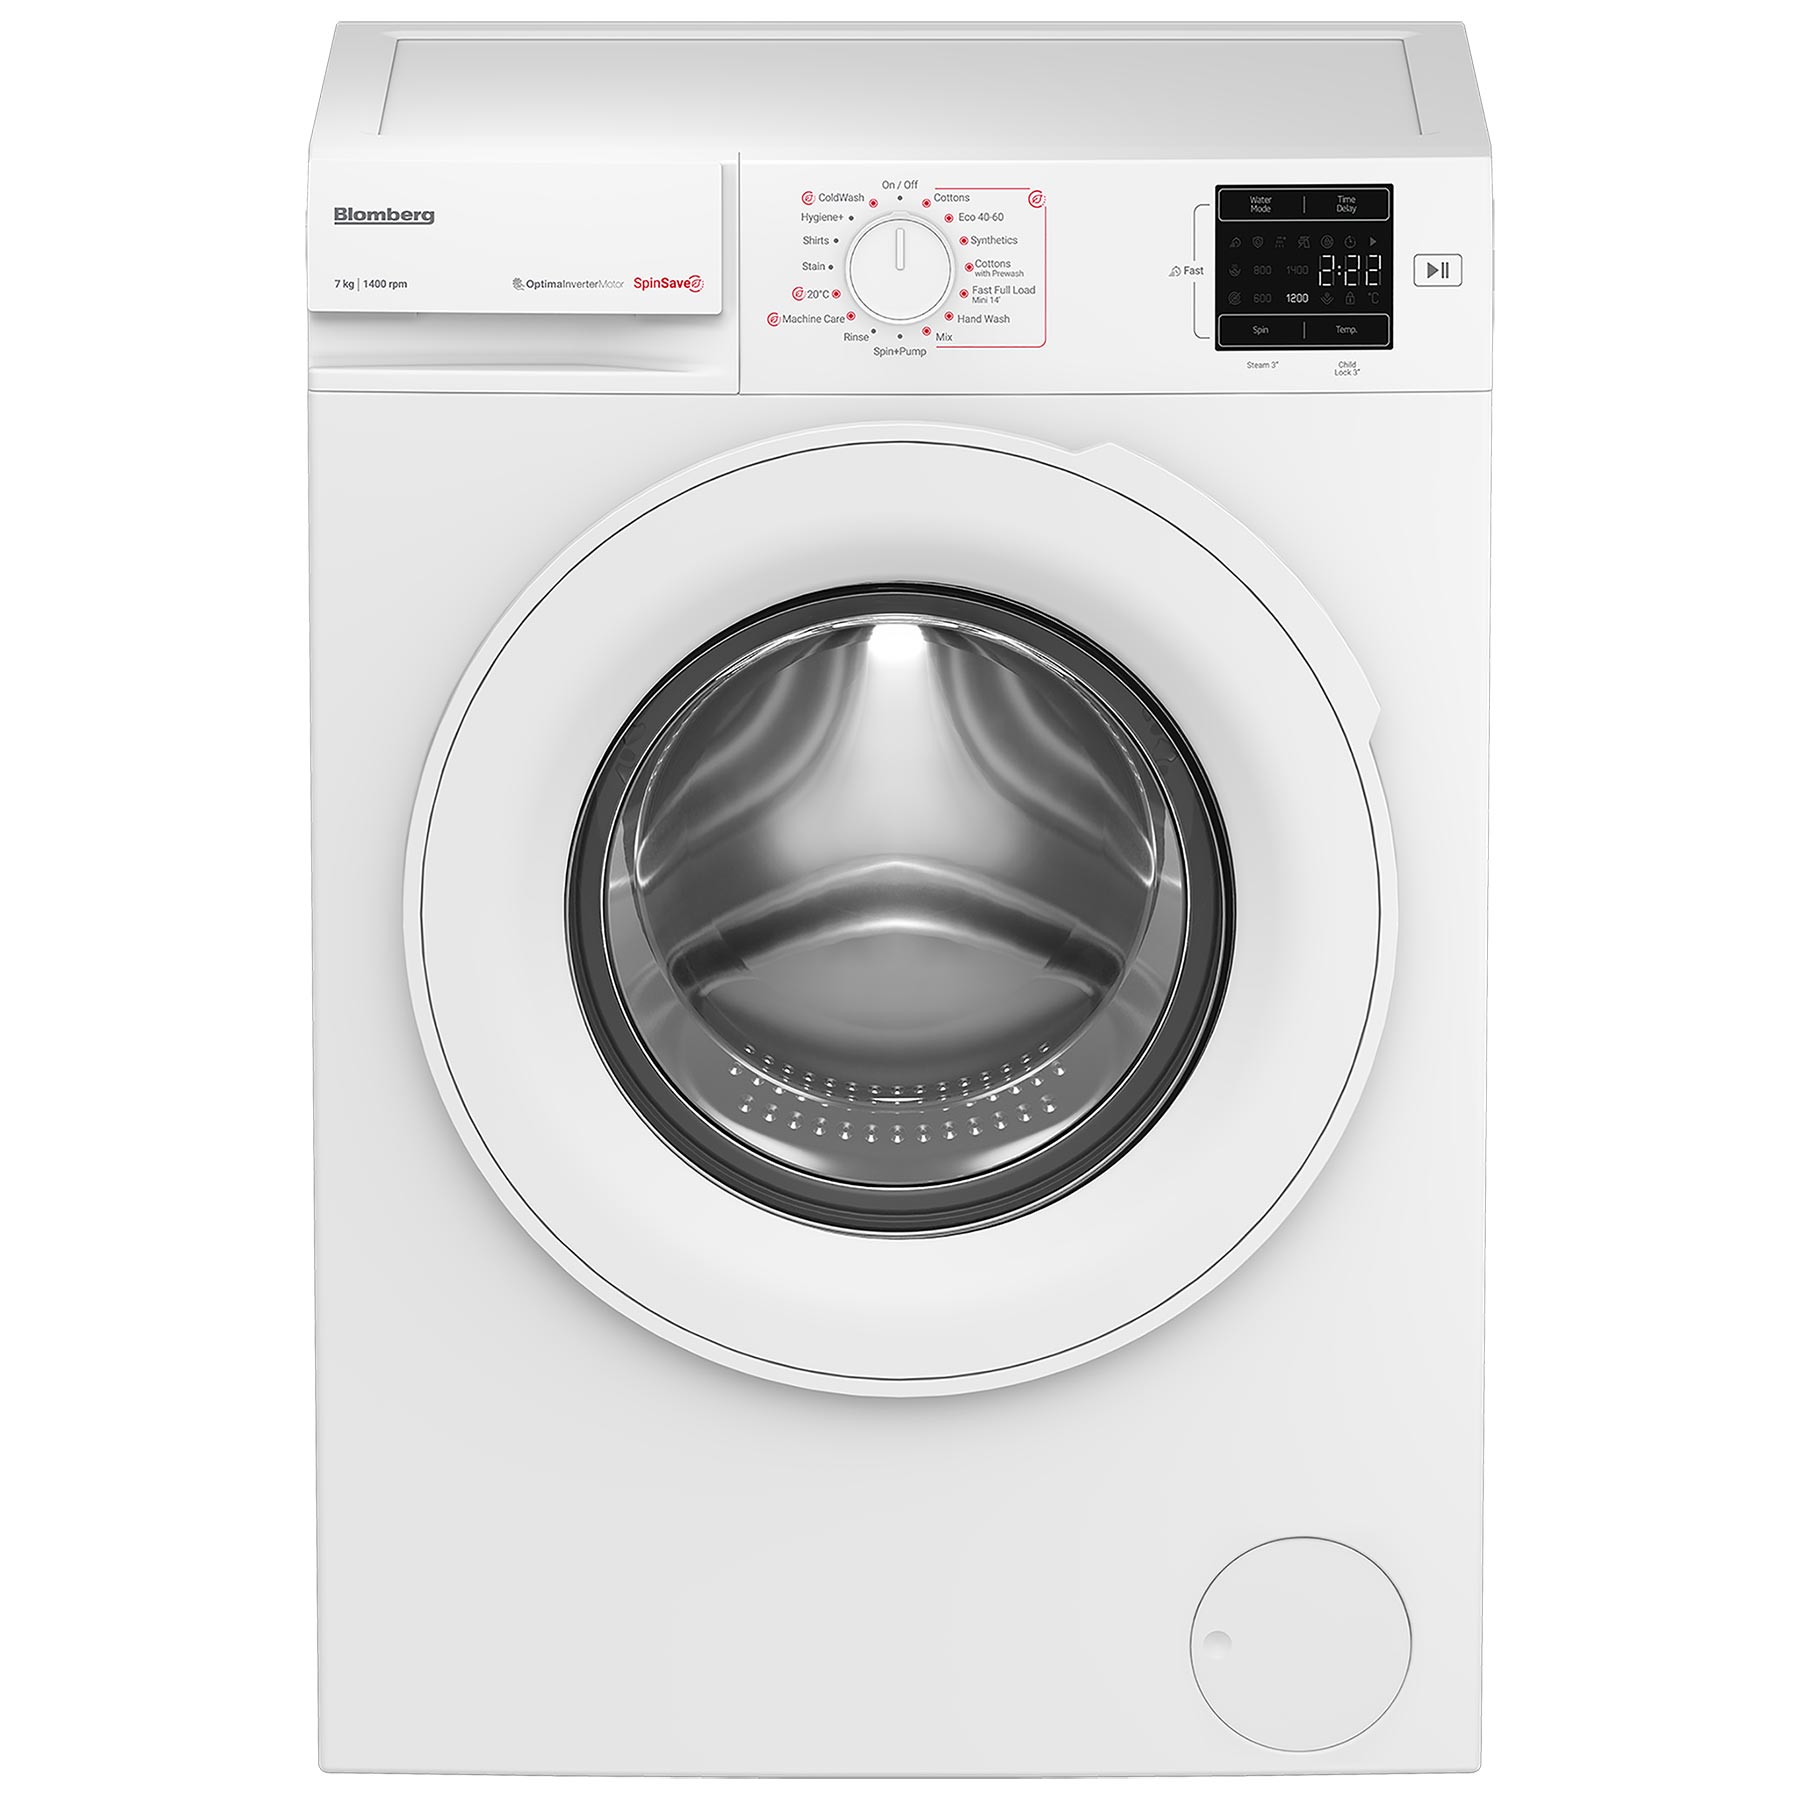 Image of Blomberg LWA27461W Washing Machine in White 1400rpm 7kg A Rated 3yr Gt